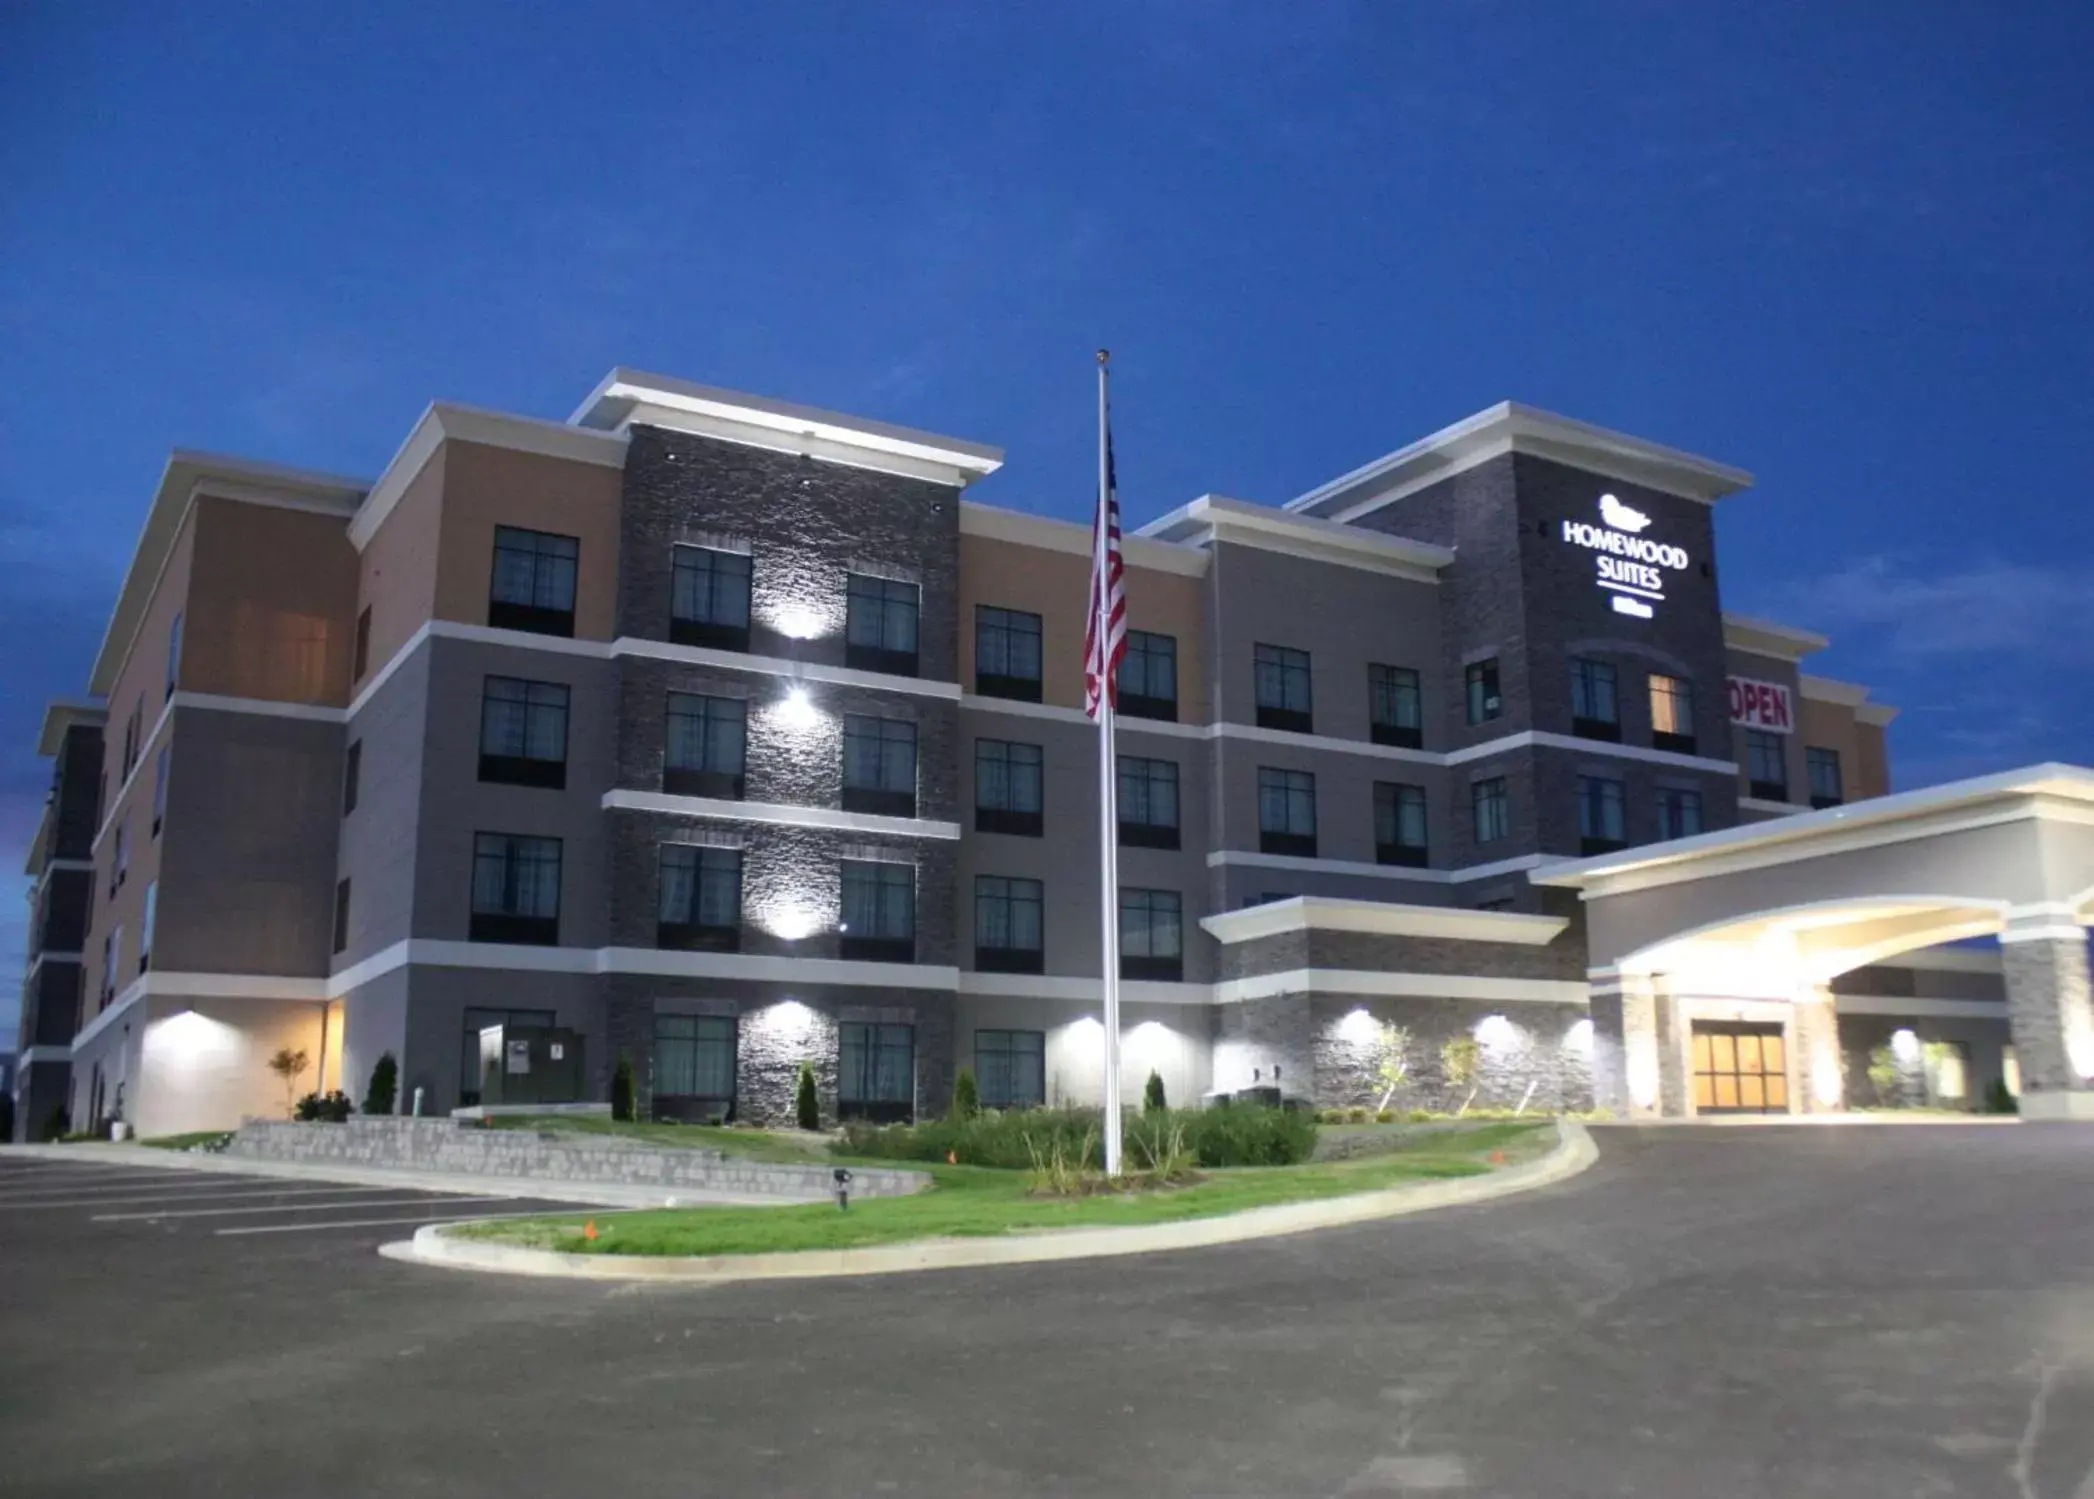 Property Building in Homewood Suites By Hilton Dubois, Pa